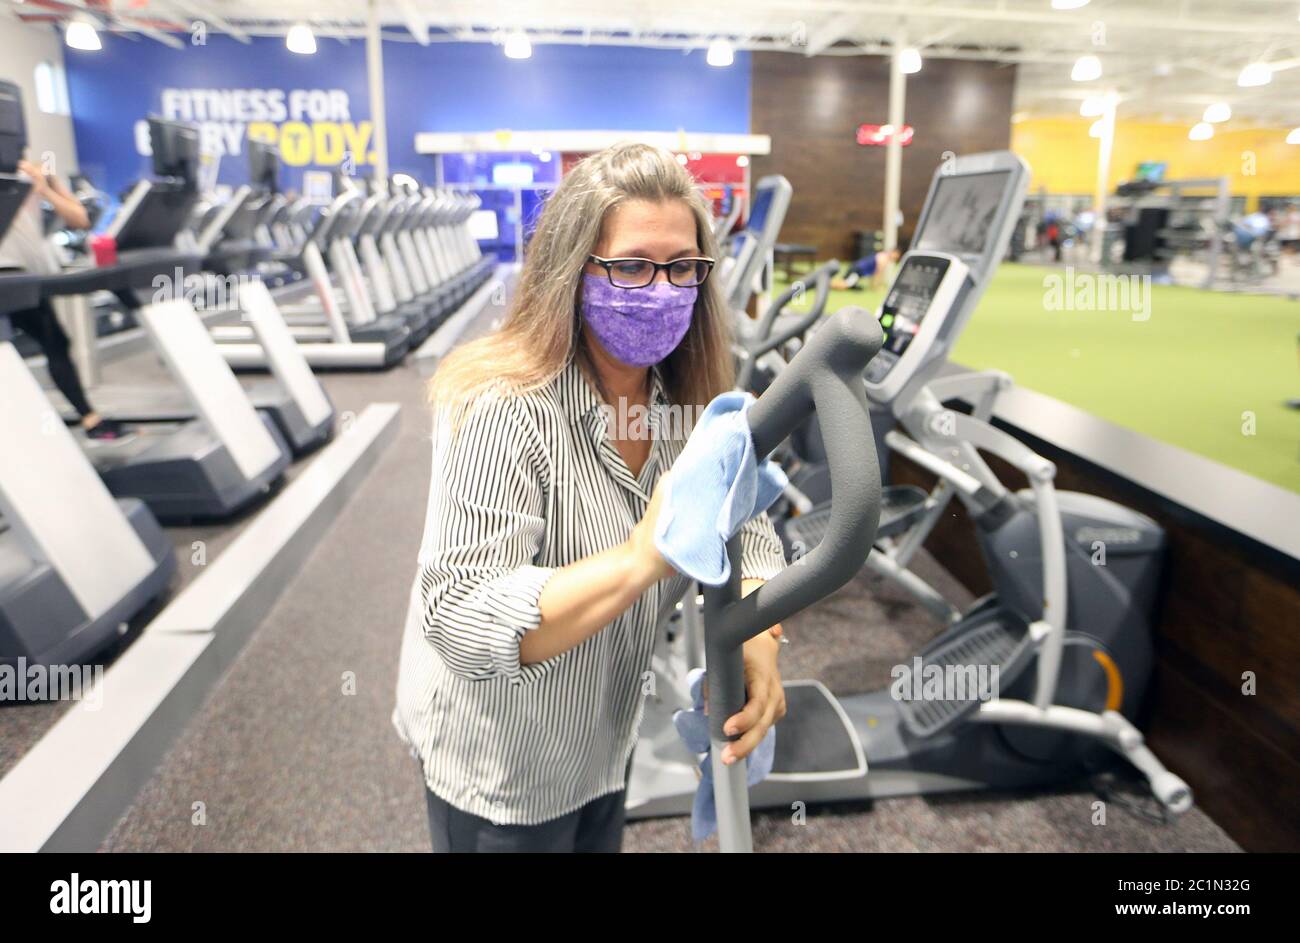 Maplewood United States 15th June Club Fitness Gym Employee Rachel Jameson Wipes Down Equipment After Use On Day One Of Their Reopening In Maplewood Missouri On Monday June 15 All